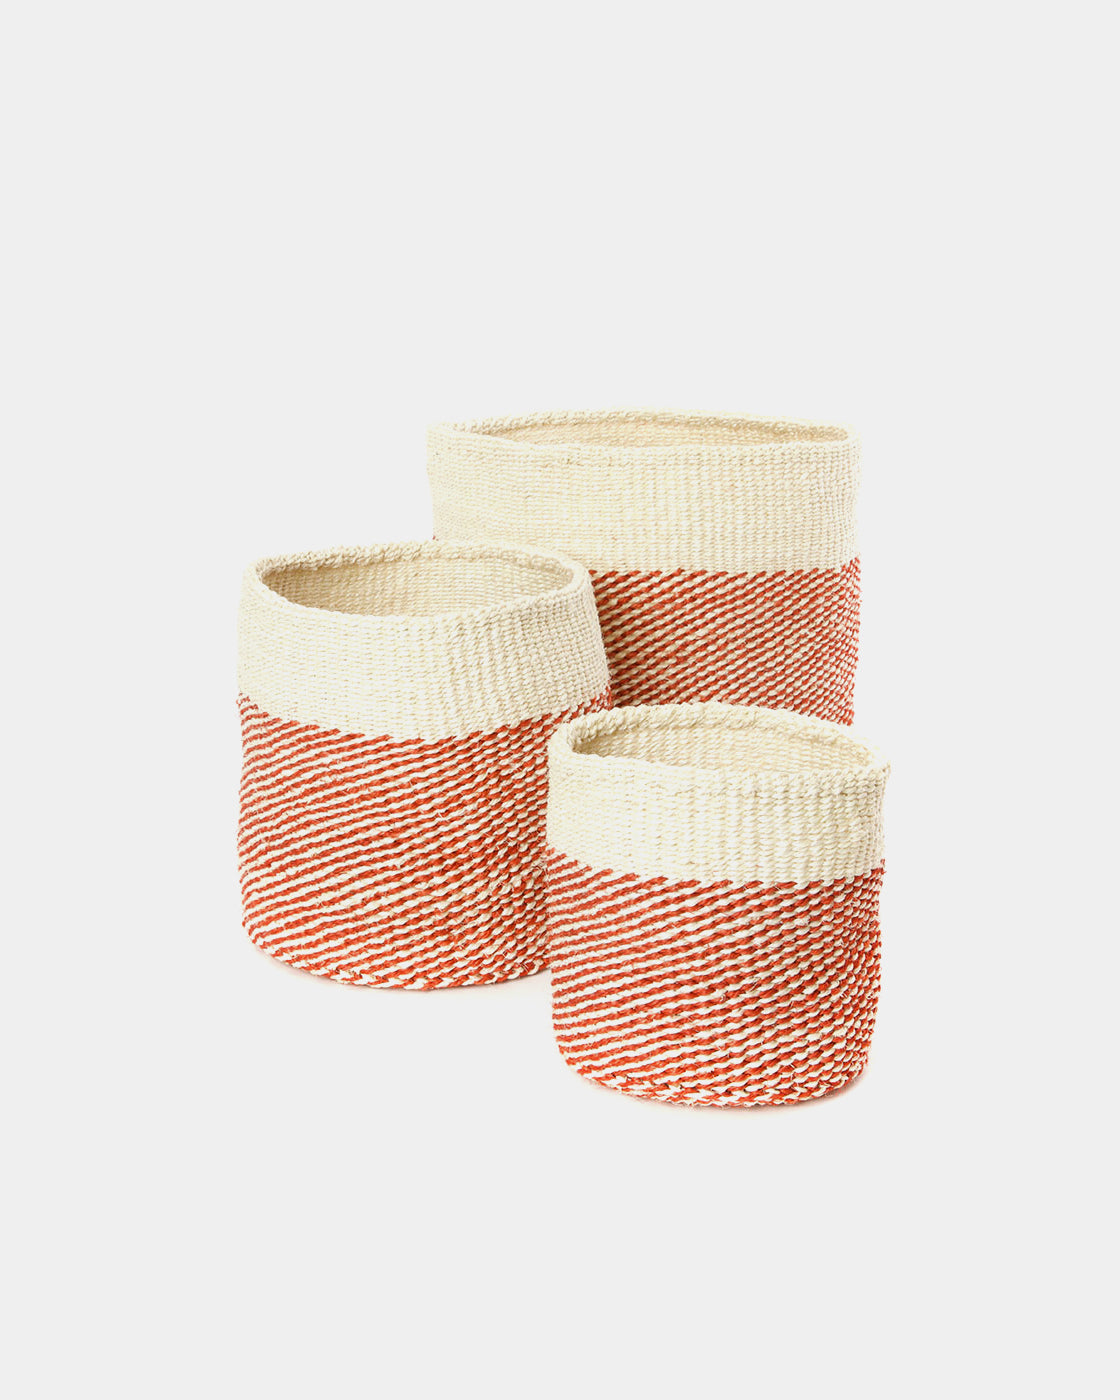 Red Dipped Sisal Basket - Hesby